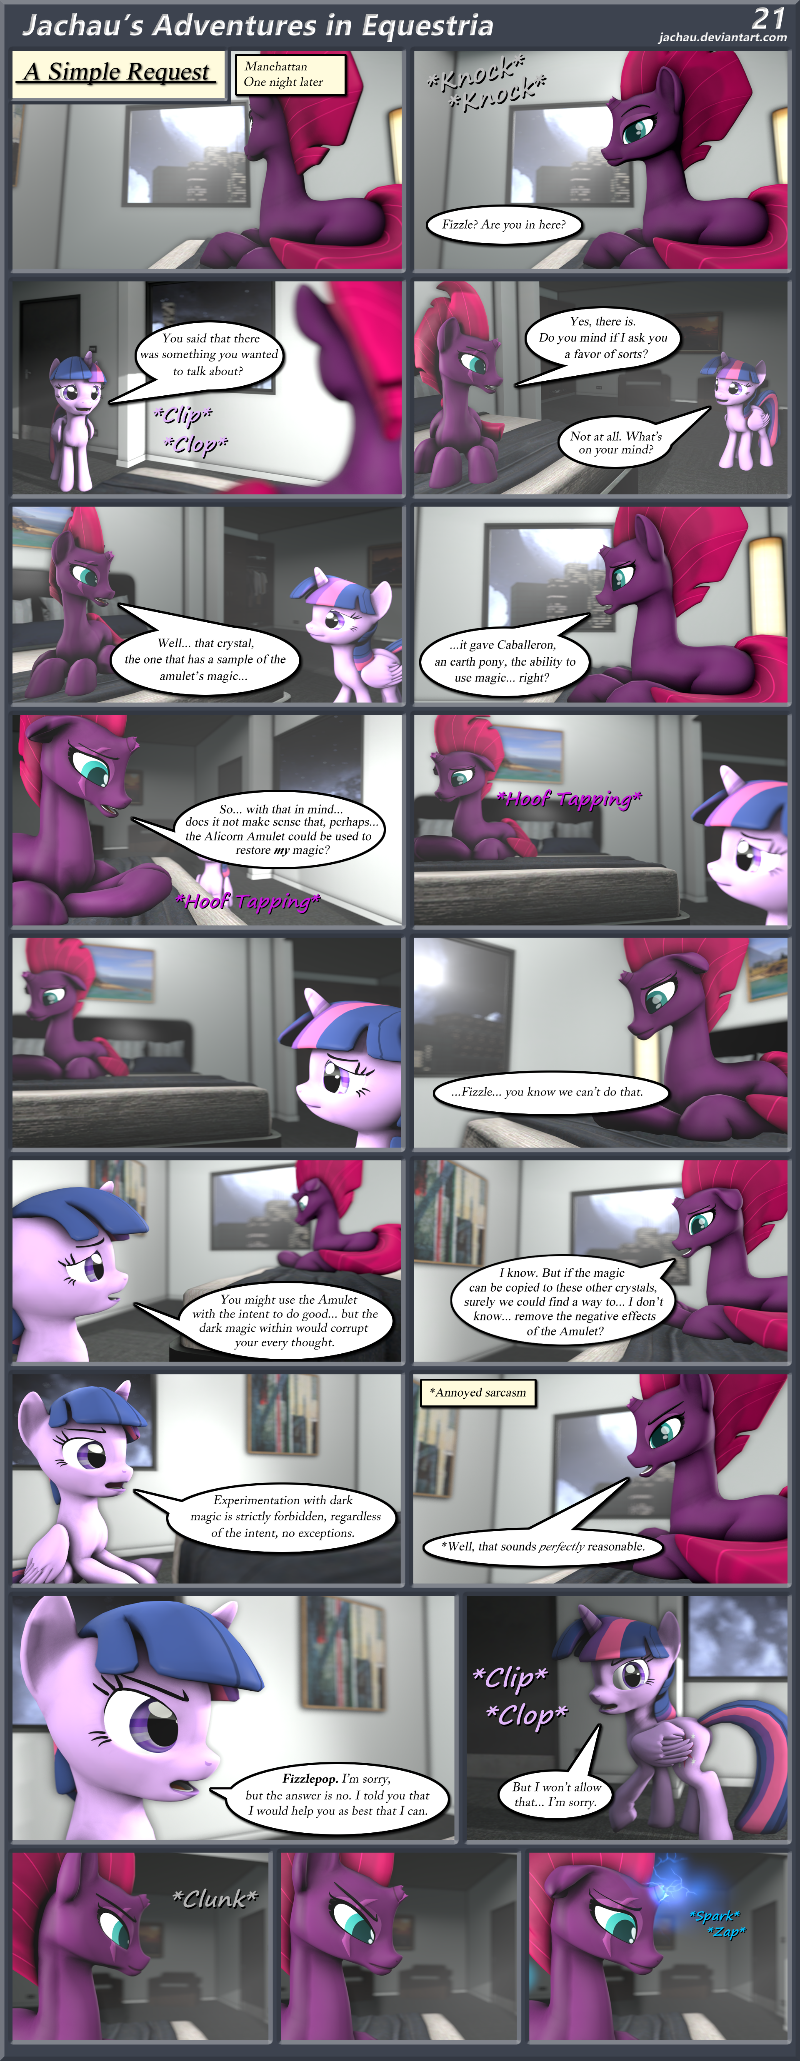 Page 21: A Simple Request